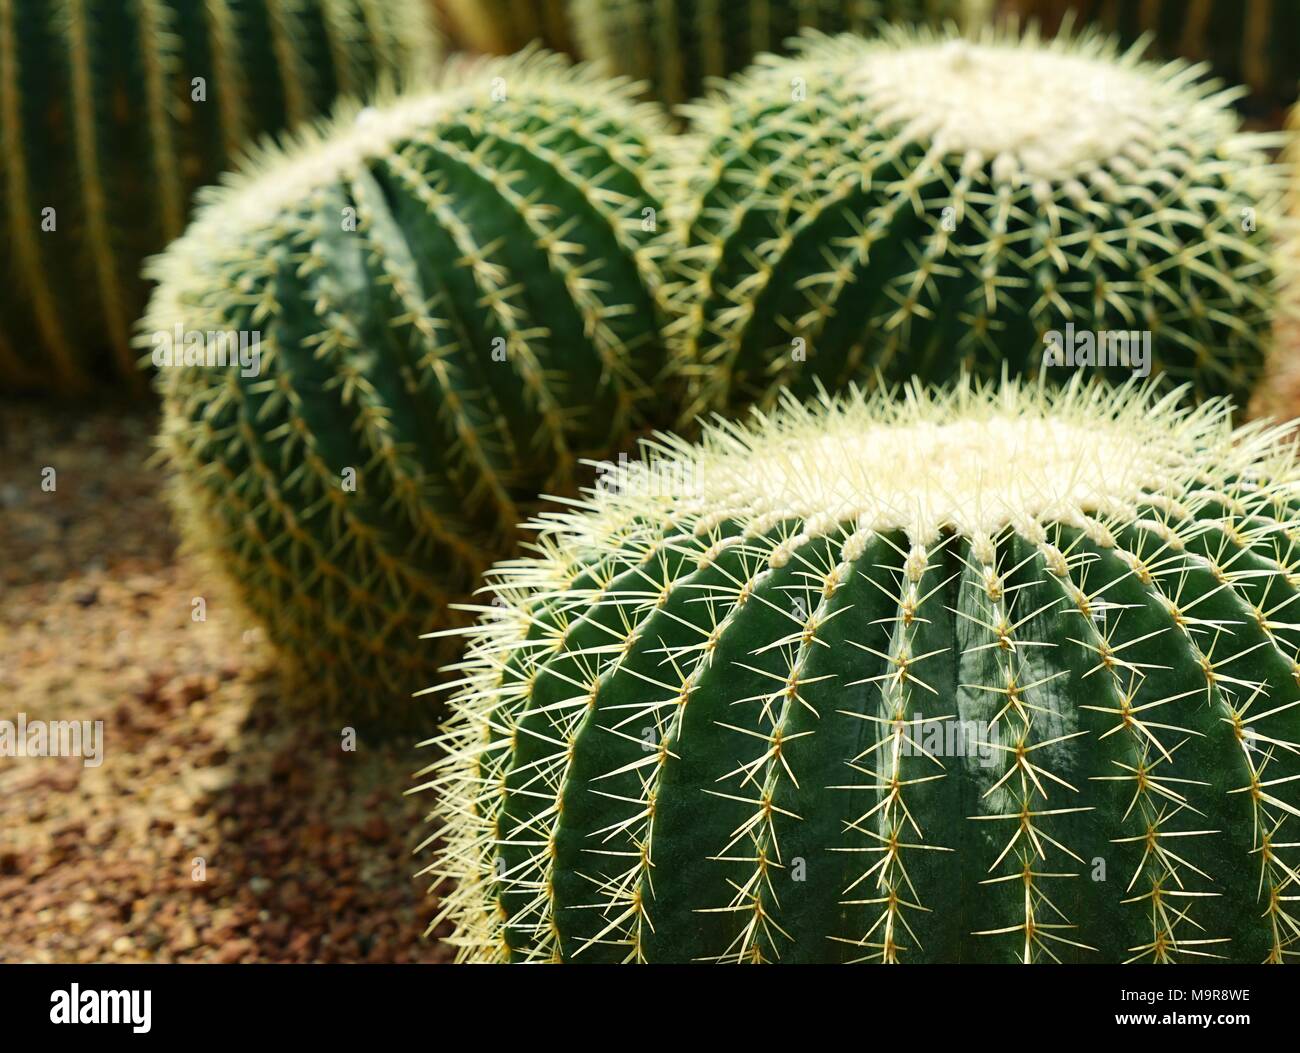 Group of golden ball cactus or Echinopsis cactus plants Stock Photo